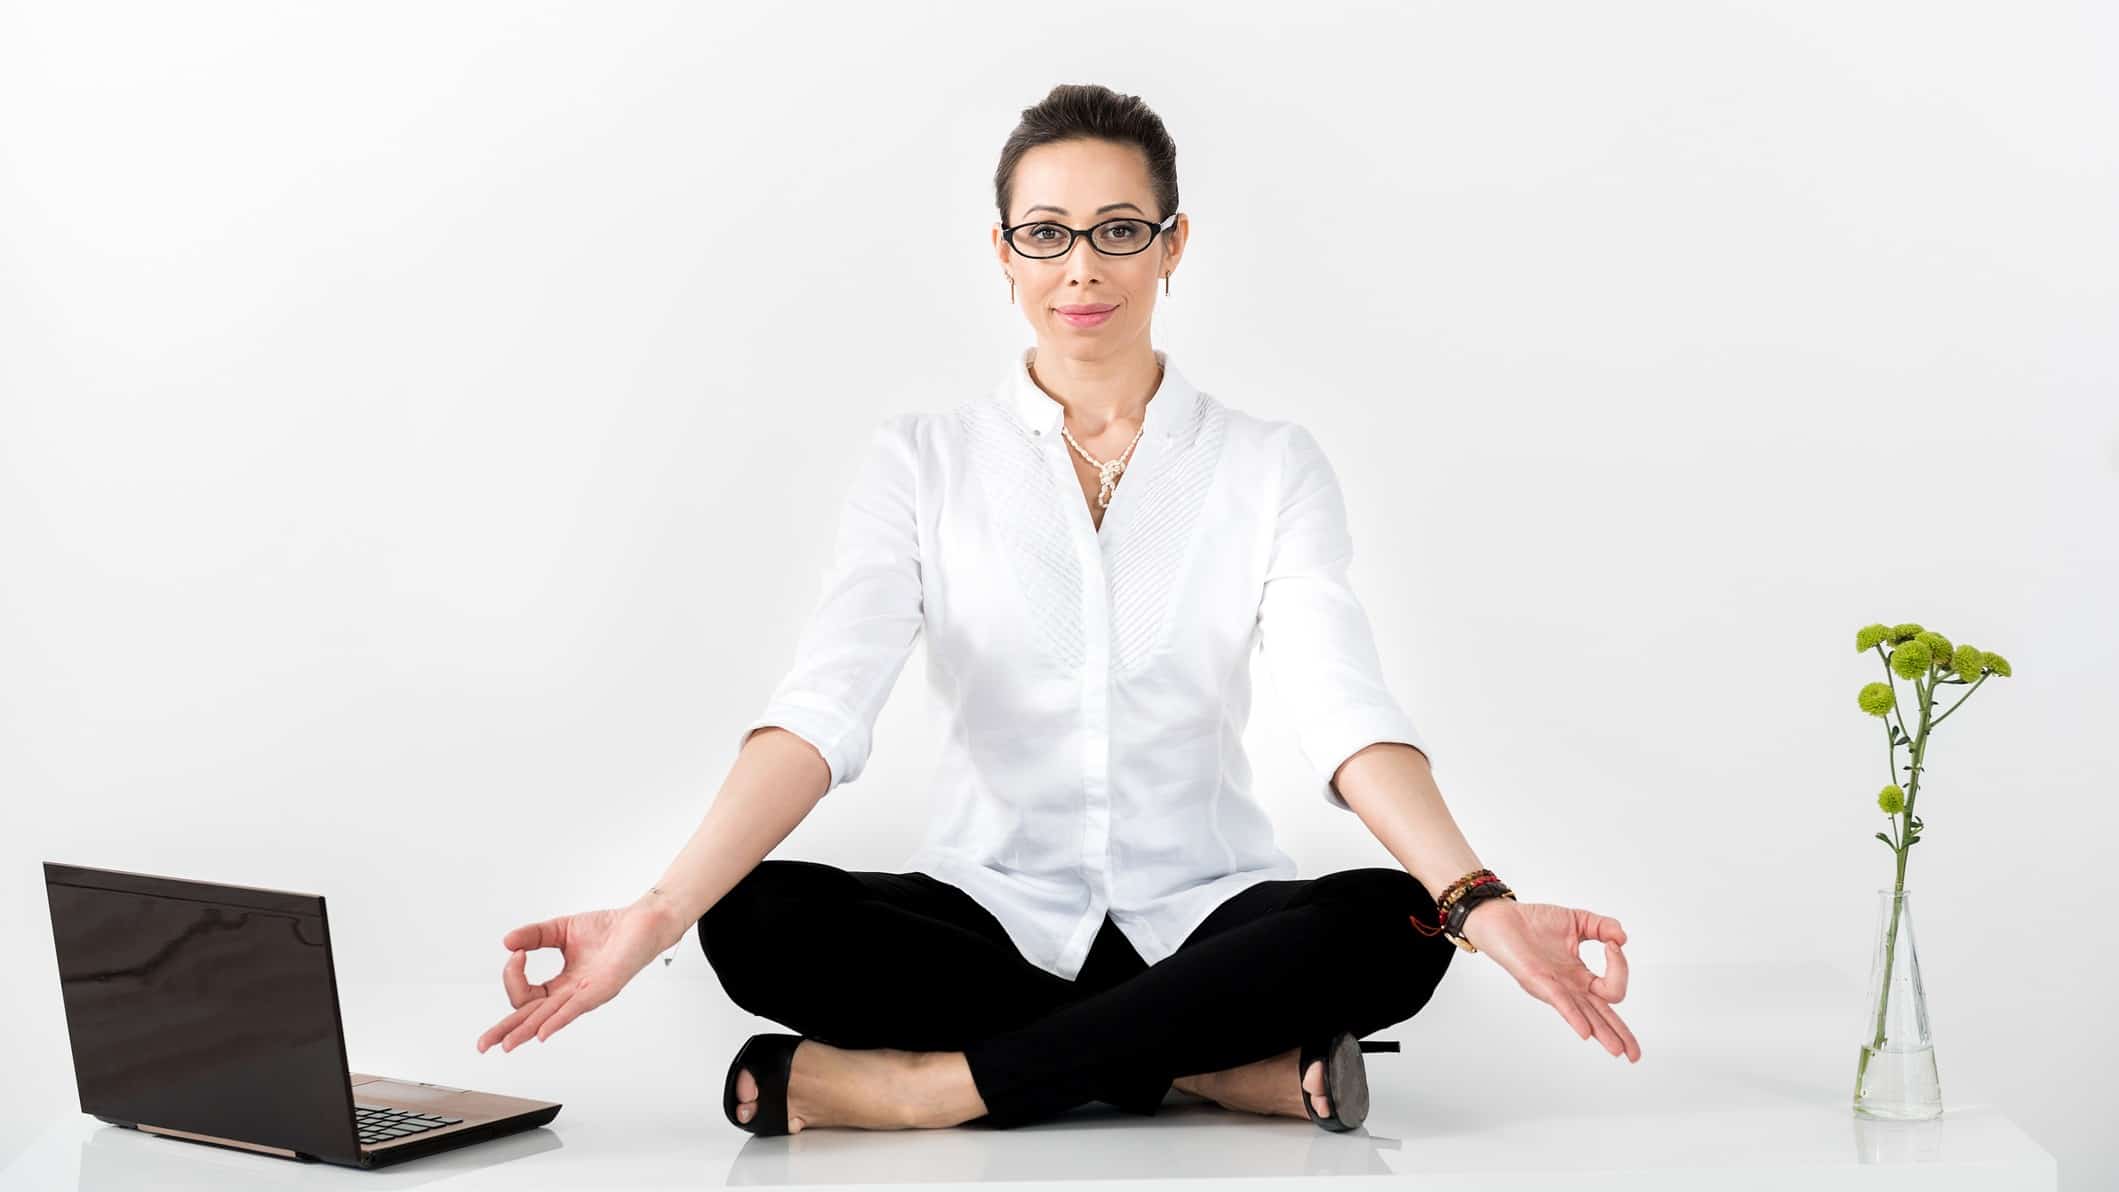 A business woman sits in the lotus yoga position near her laptop, indicating a patient investment style